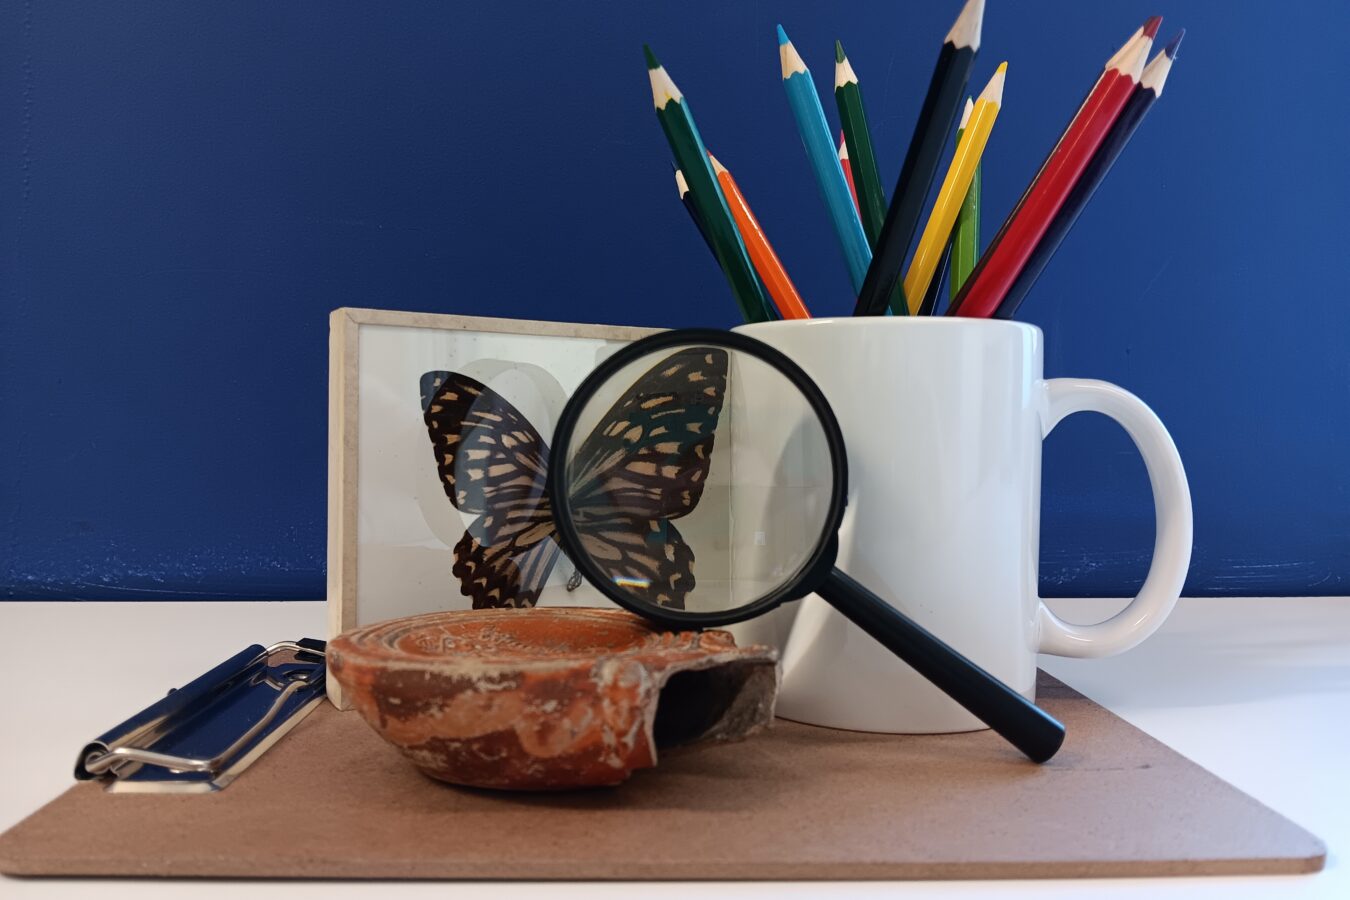 a collection of objects: a white mug containing coloured pencils, a patterned butterfly preserved in a frame, a magnifying glass and a ceramic bowl shaped object